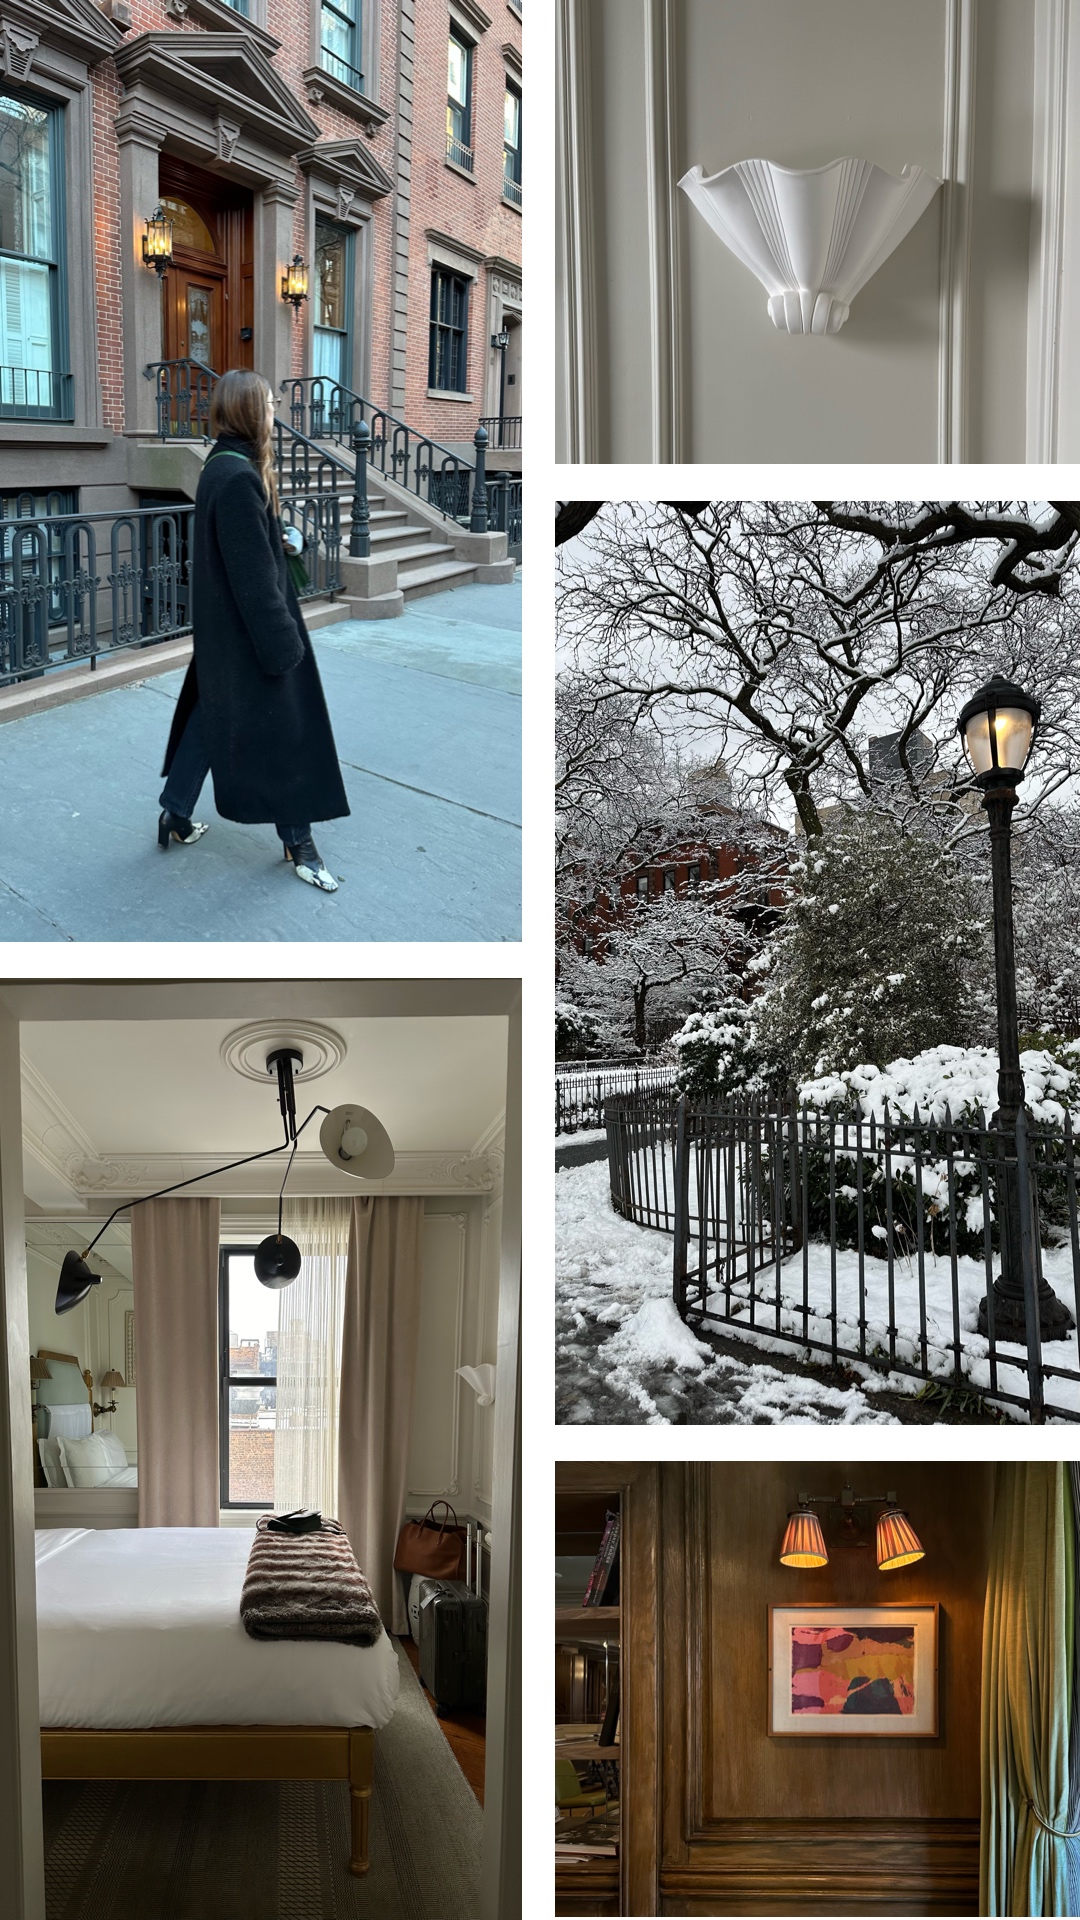 Brooklyn / West Village Weekend Highlights with winter photos